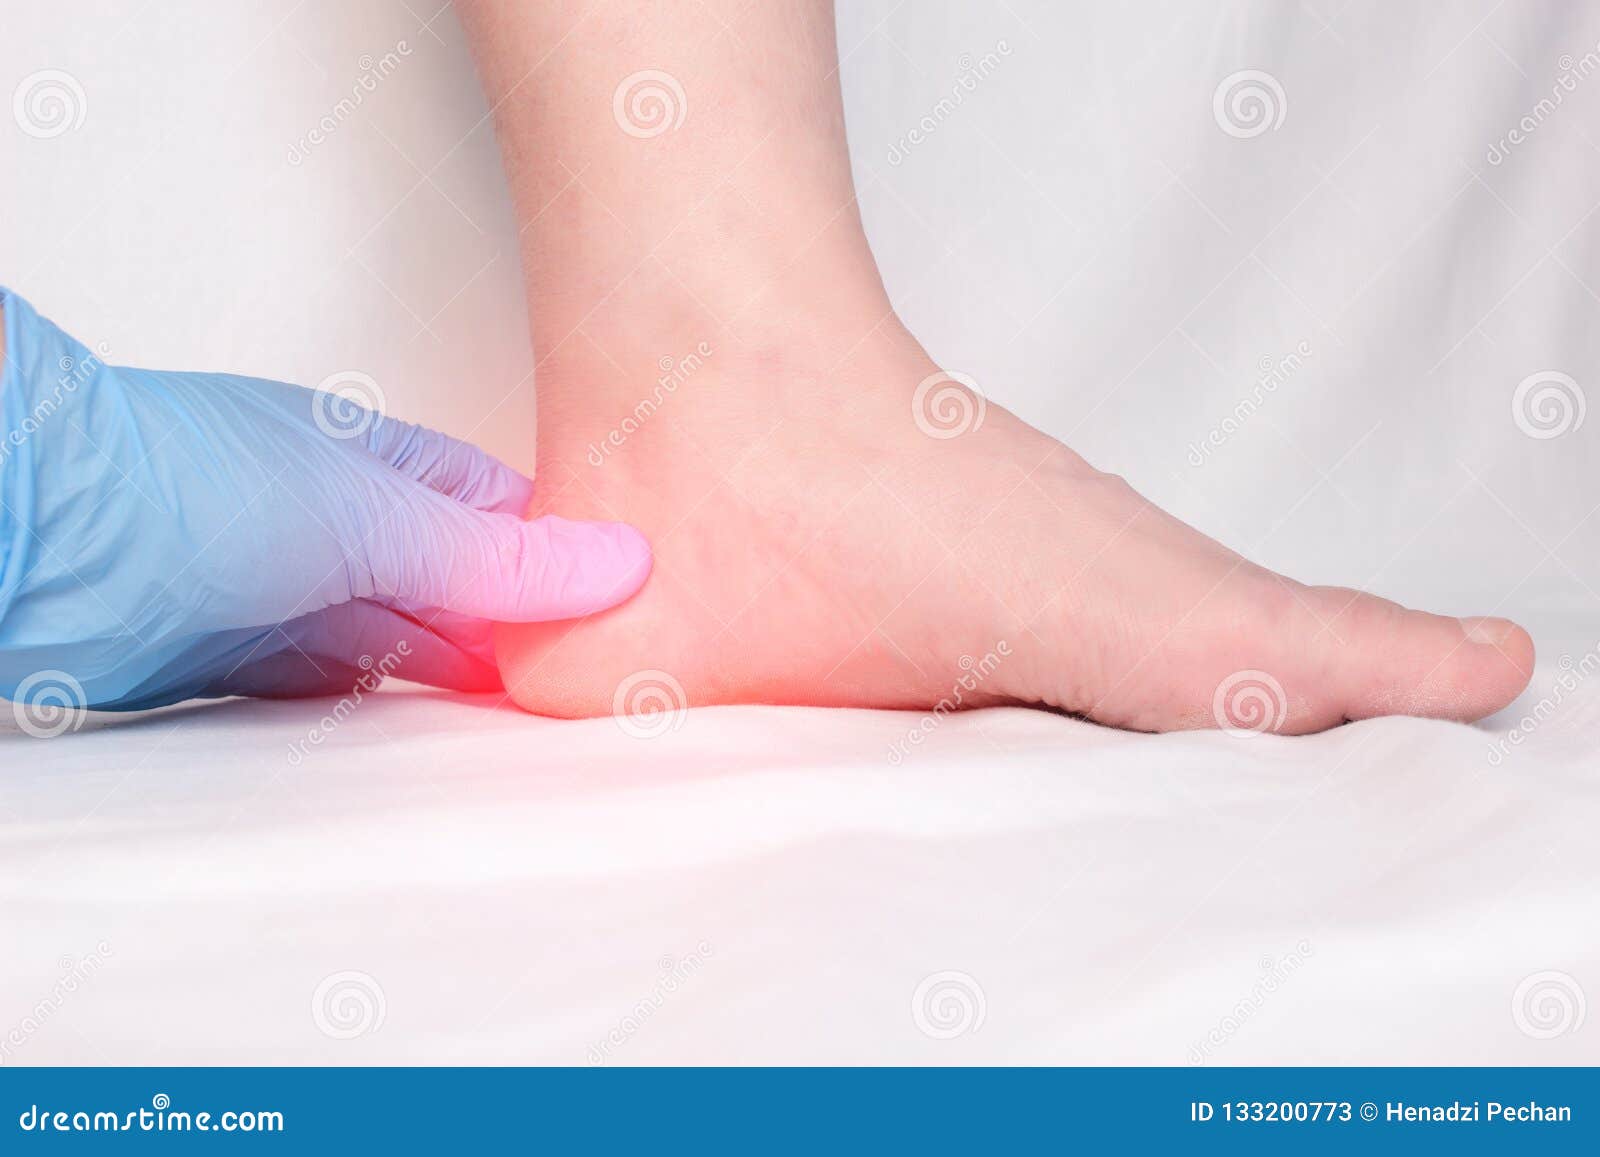 a doctor in medical gloves examines a patient`s heel spur, pain in the foot and heel, plantar fasciitis, close-up